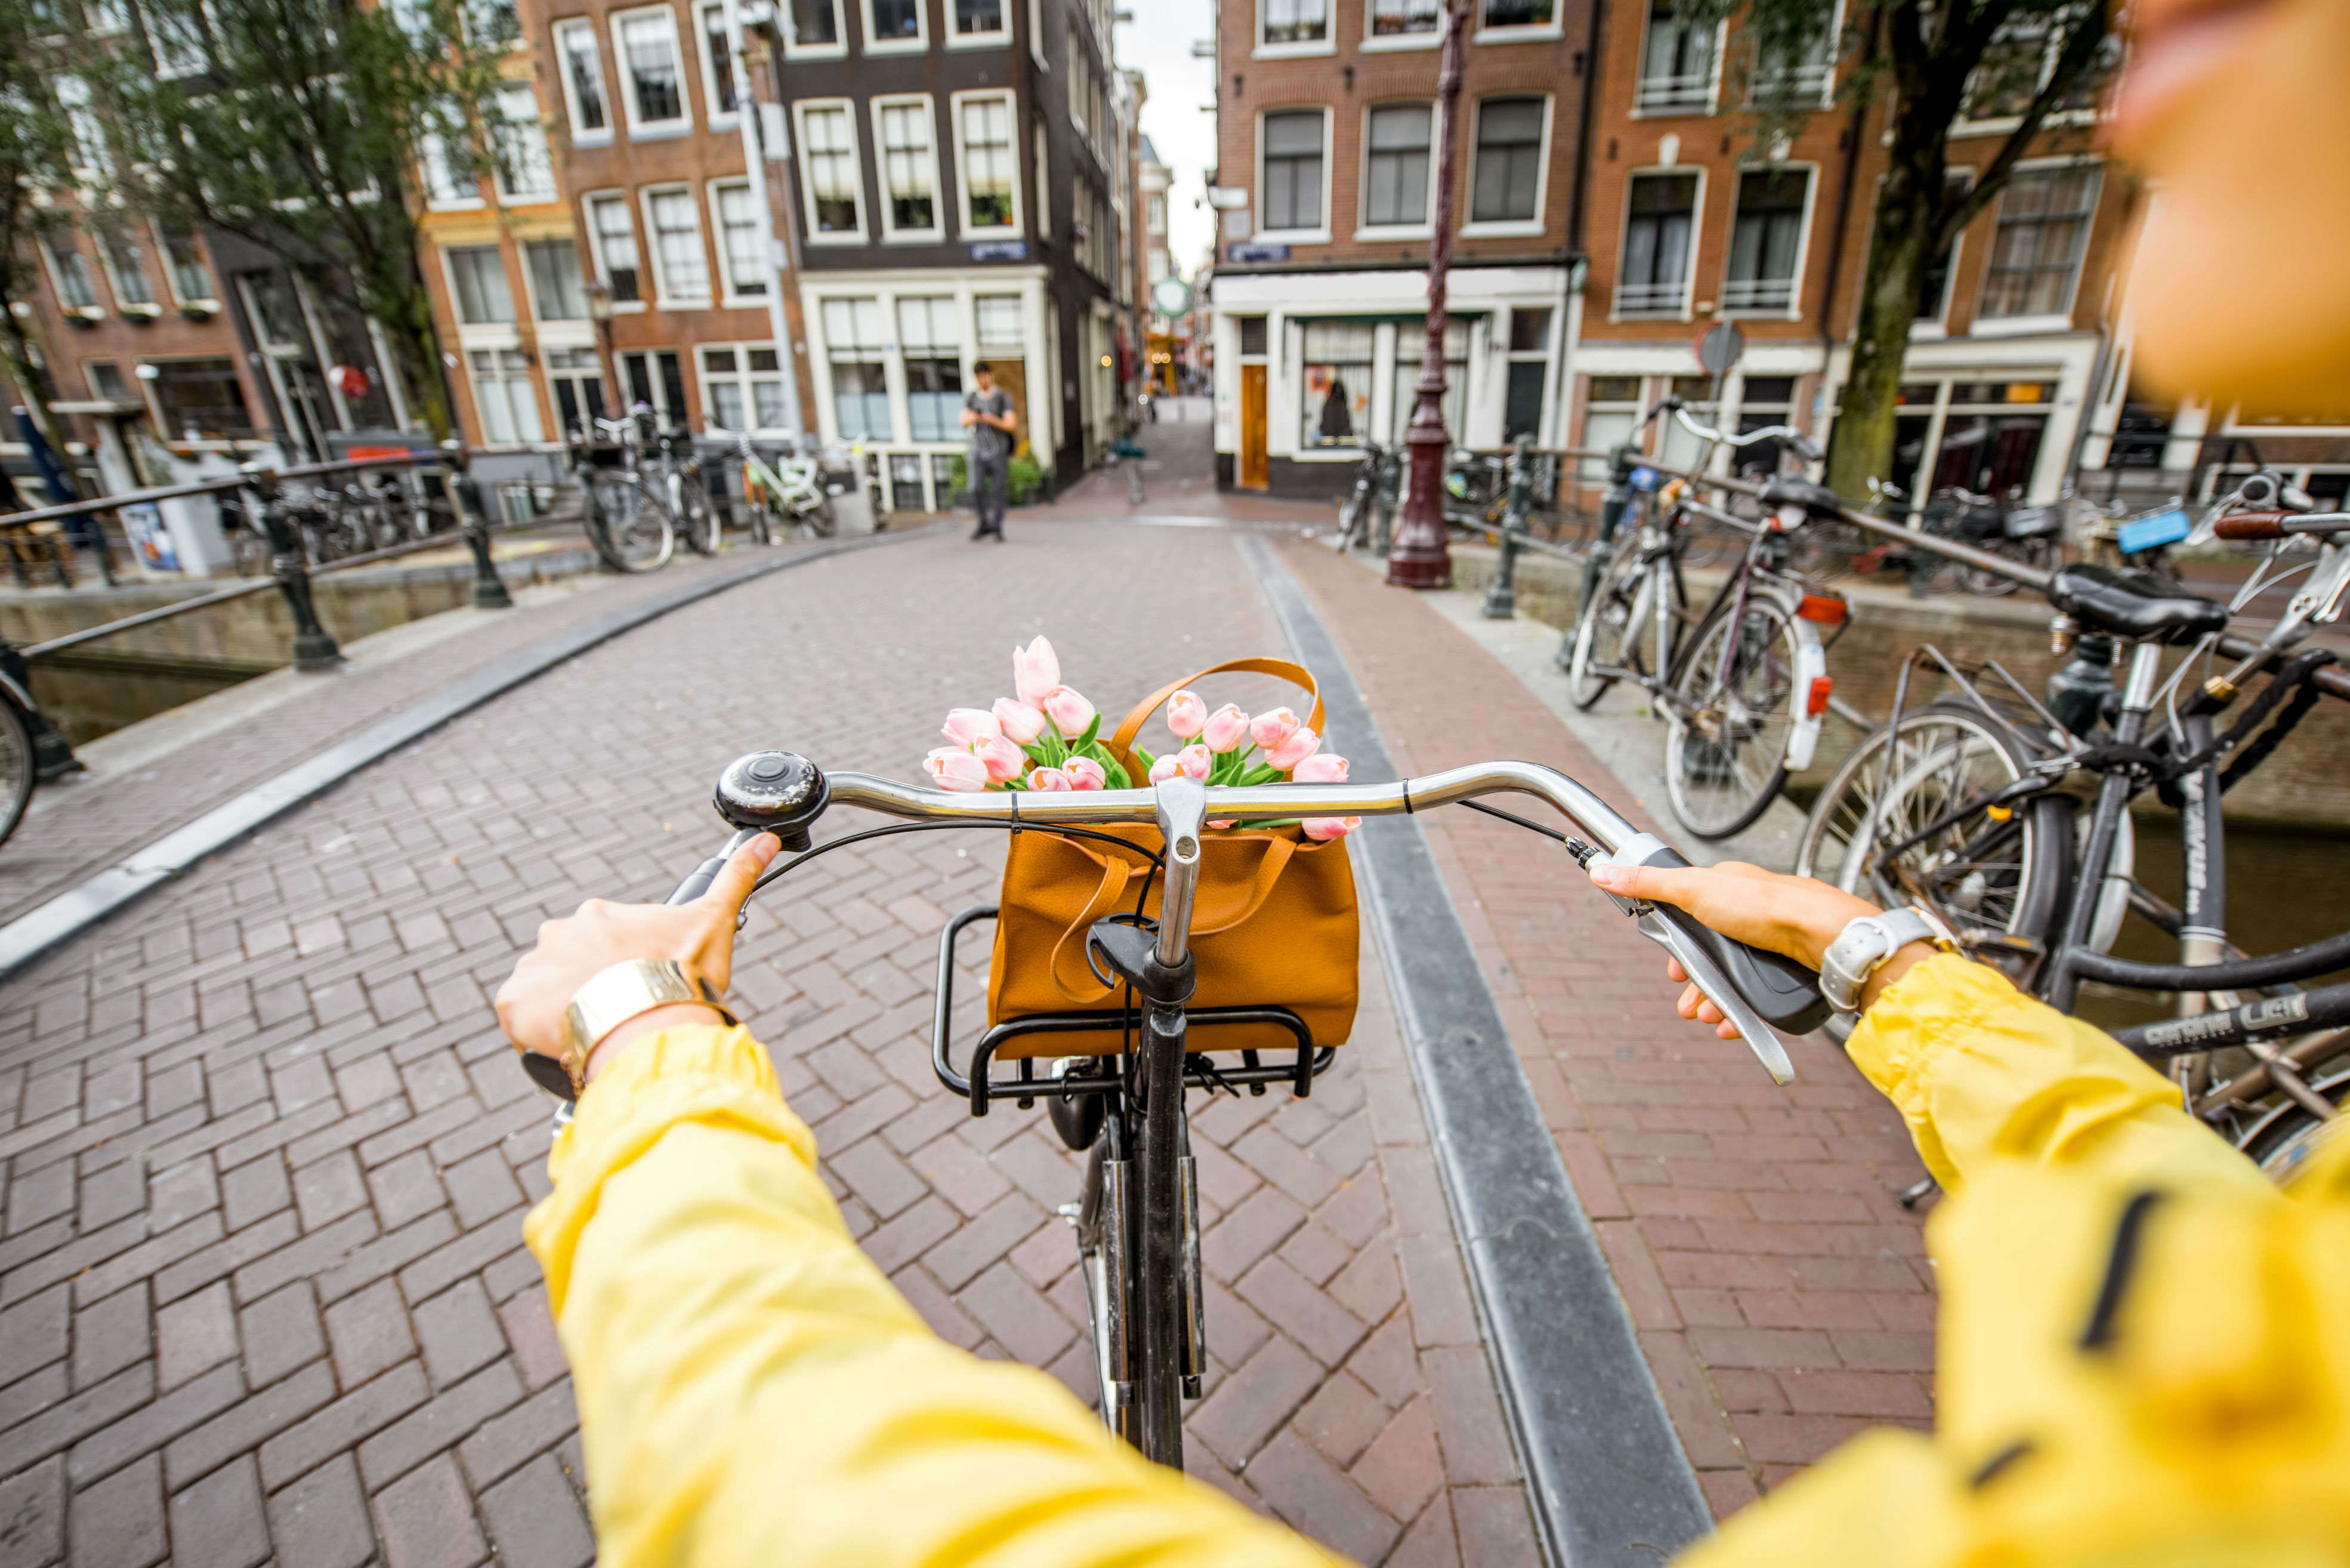 Cycling in Amsterdam is set to get even more fun